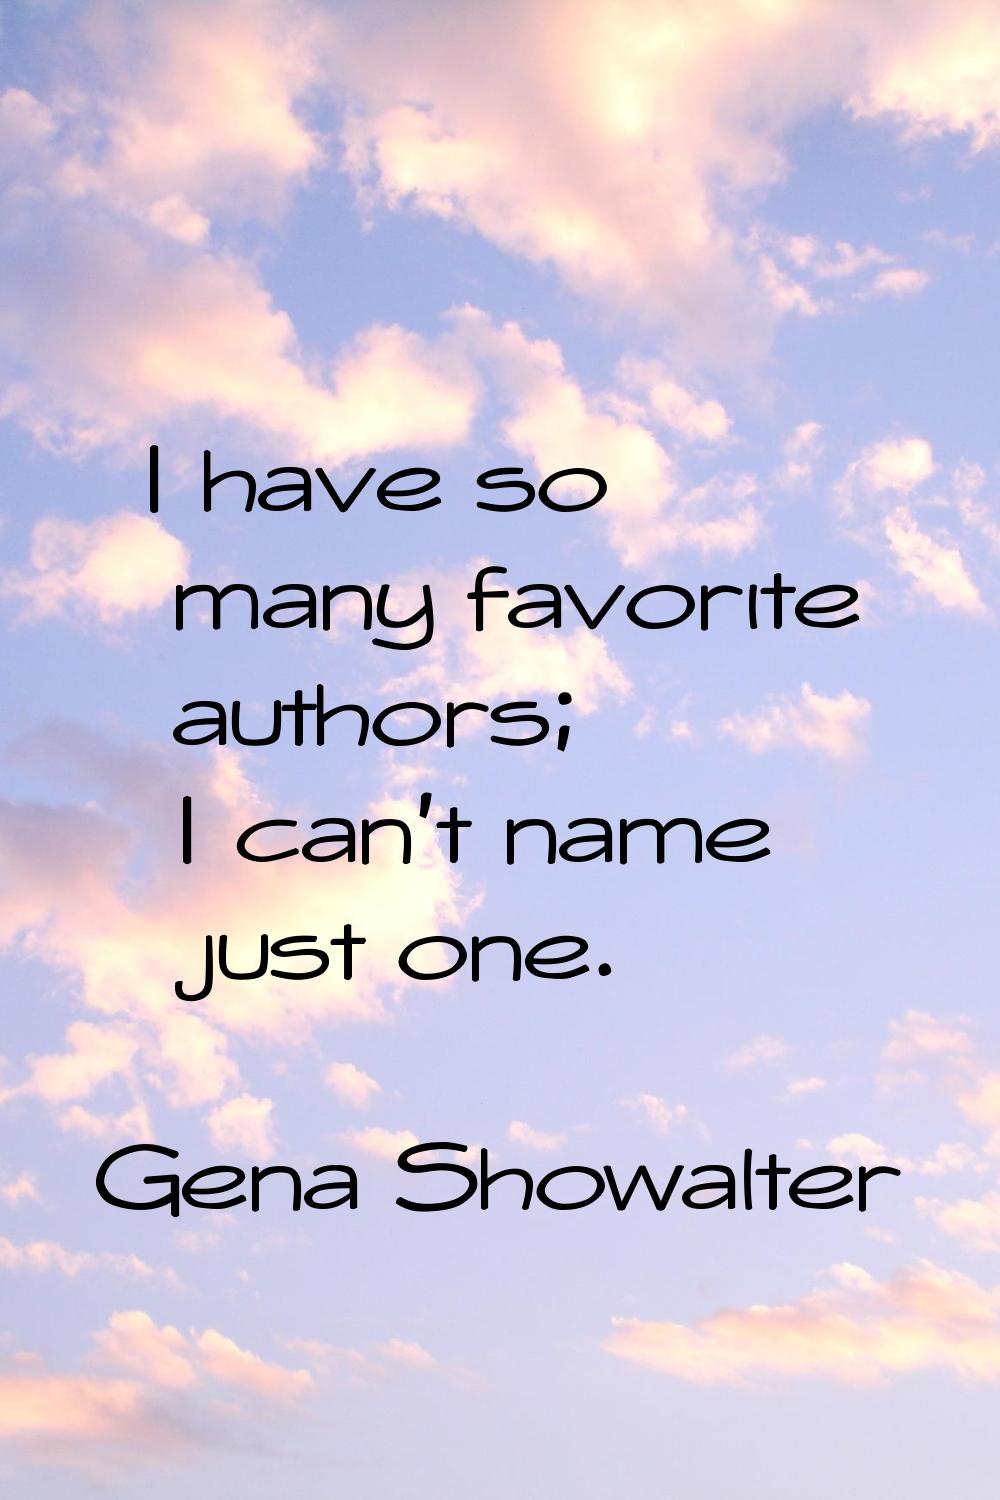 I have so many favorite authors; I can't name just one.